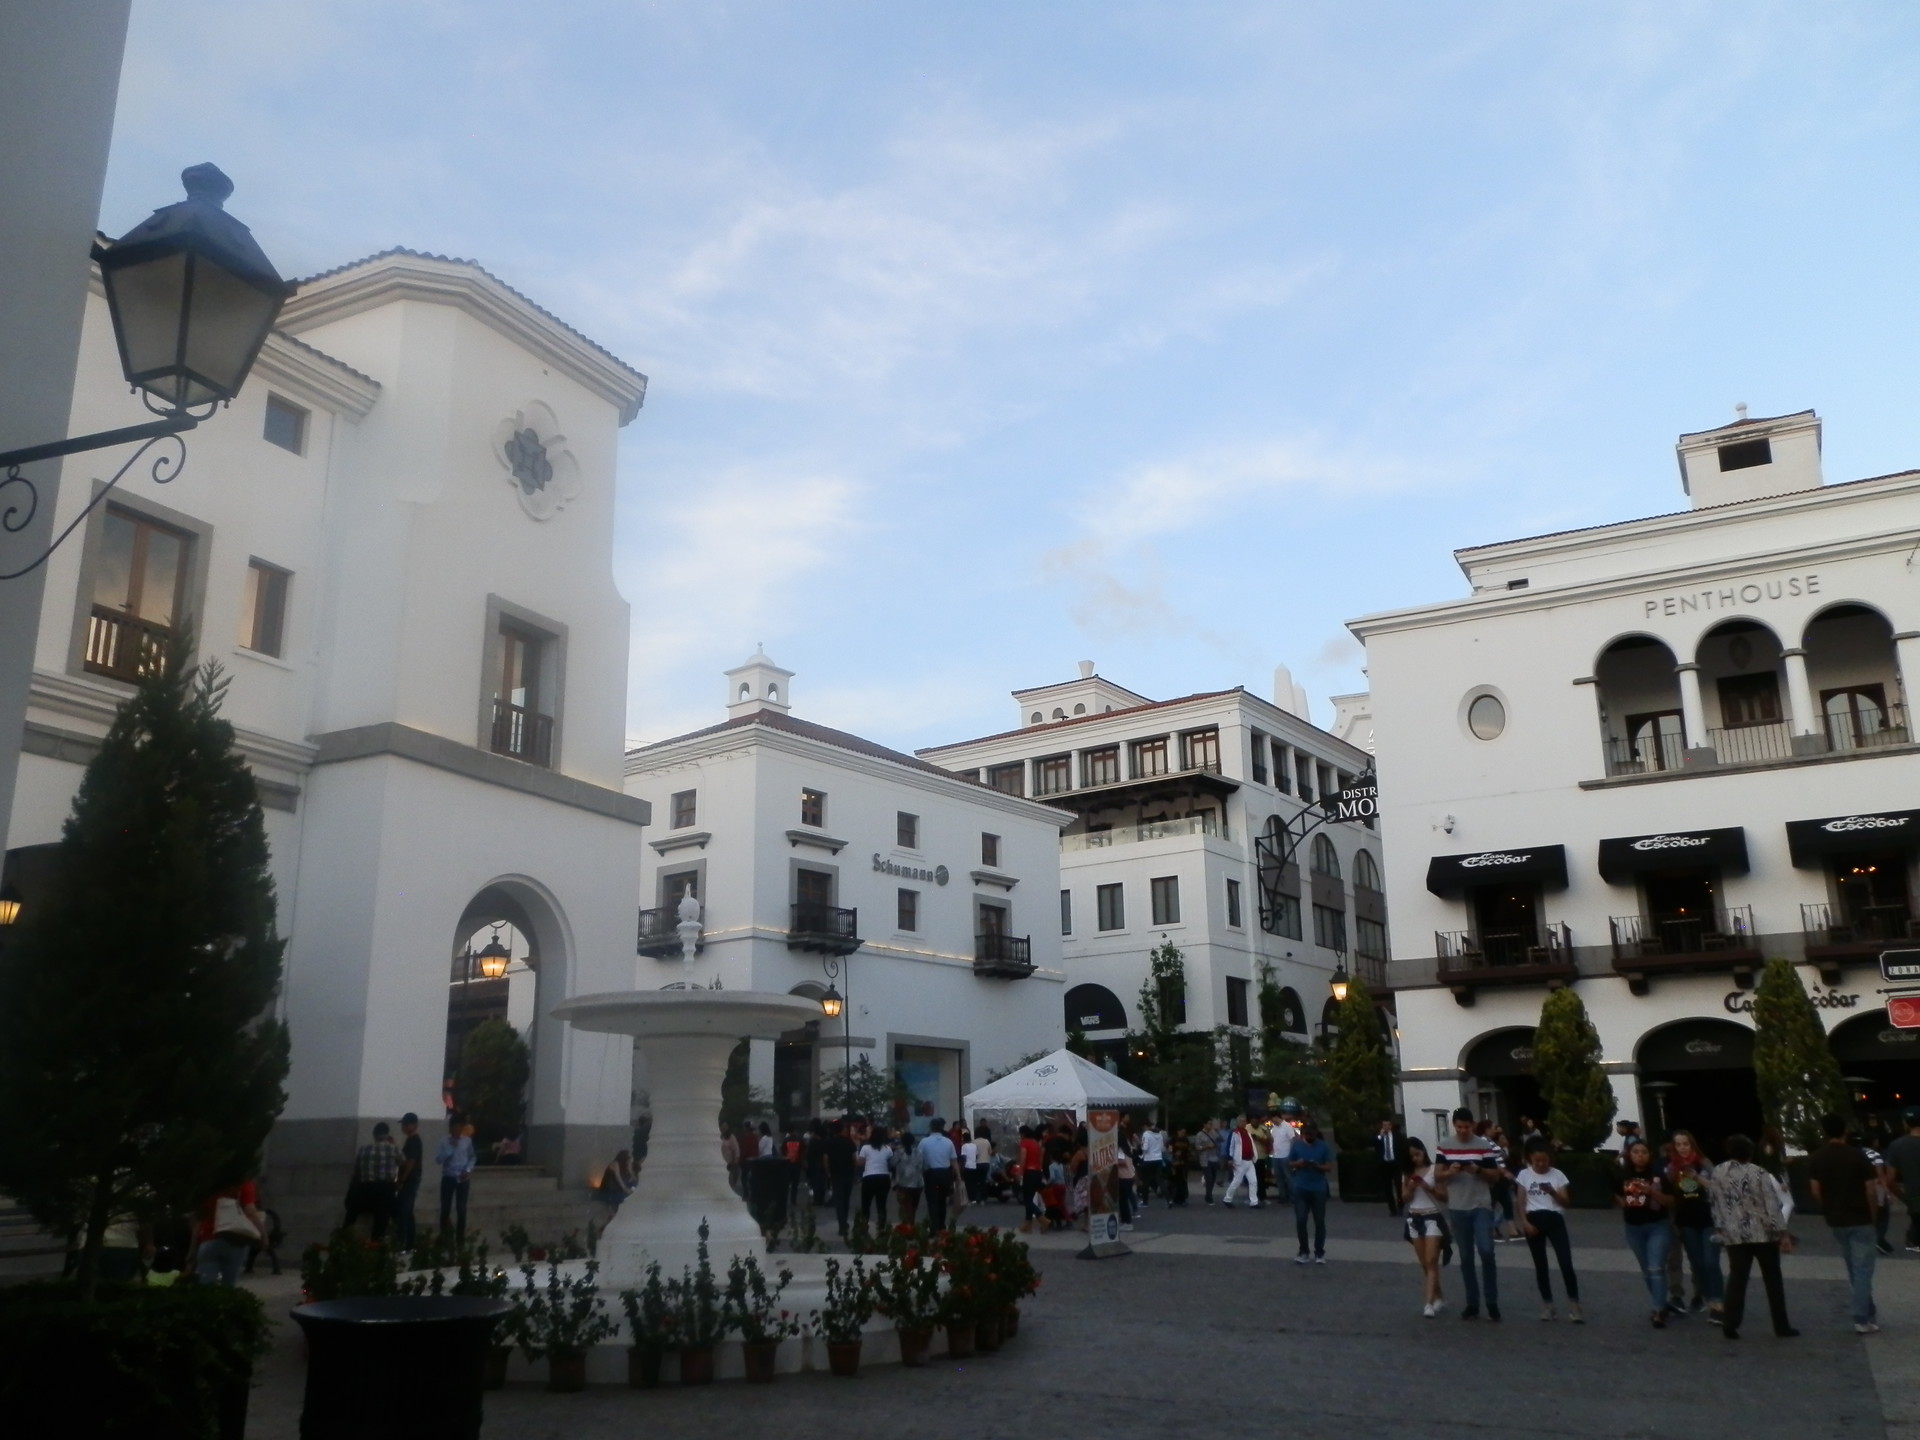 Guatemala city - I almost could not leave Guatemala